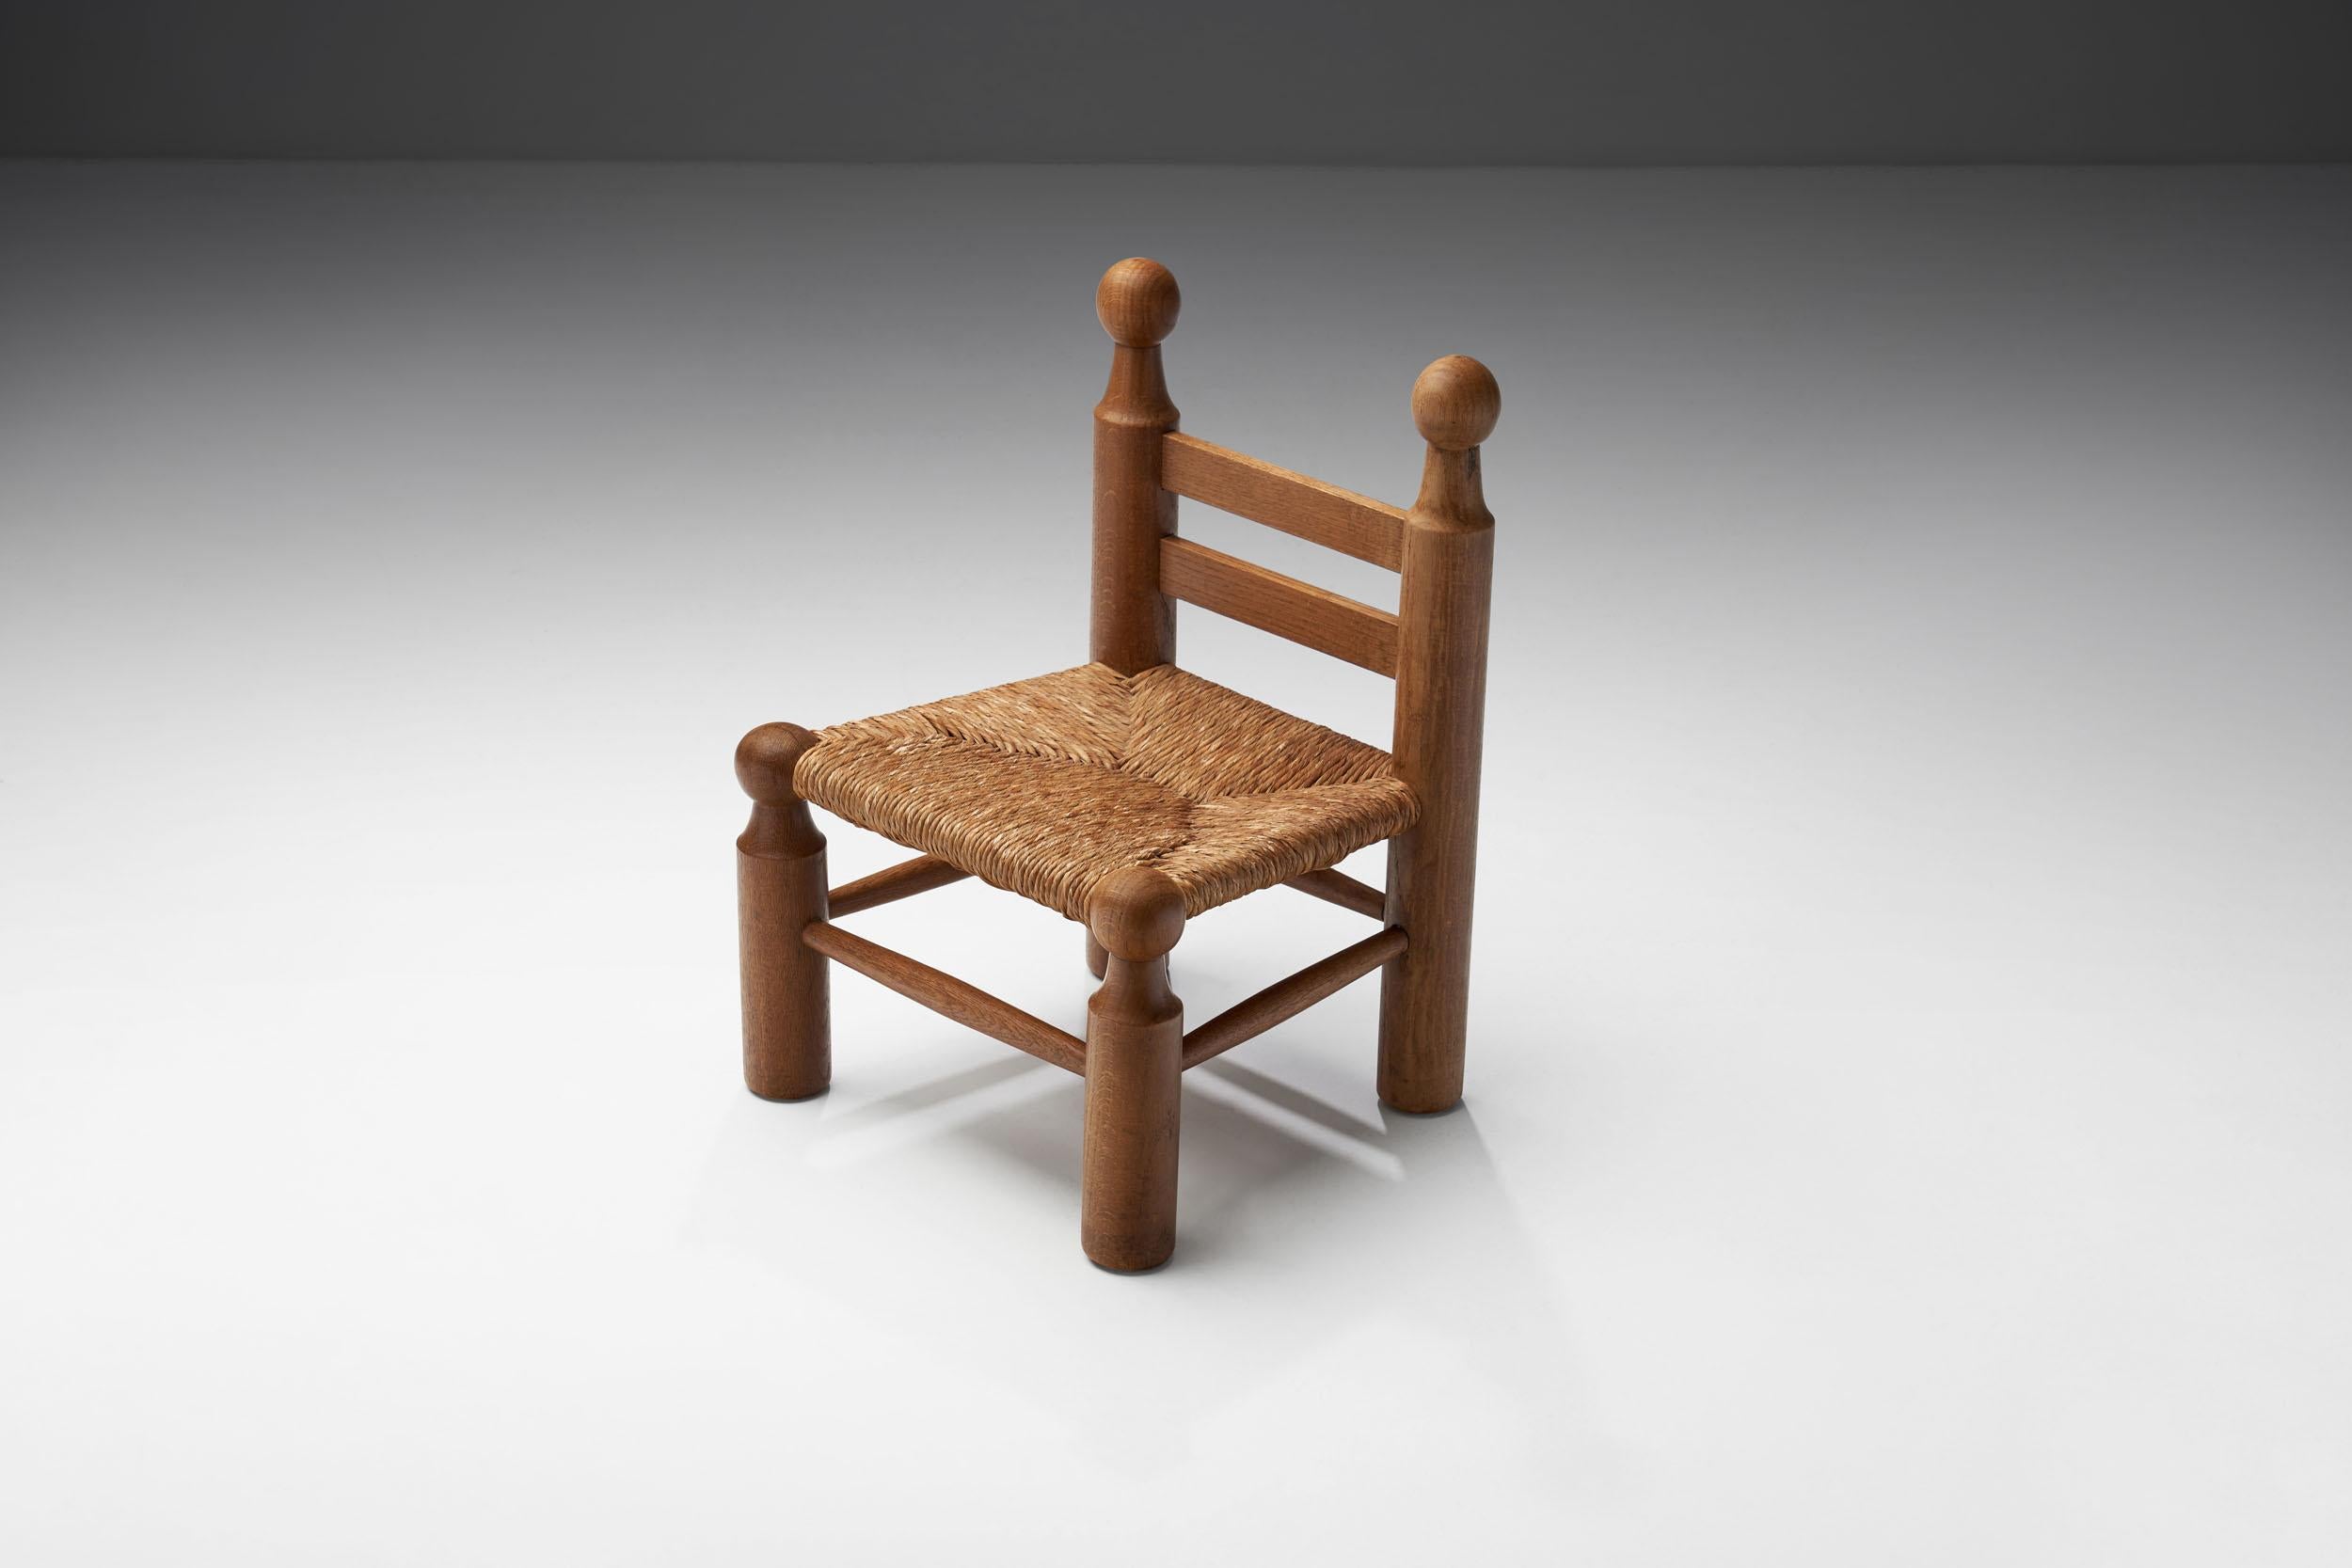 Mid-20th Century Small Wood and Wicker Chair by a European Cabinetmaker, Europe, Ca 1950s For Sale